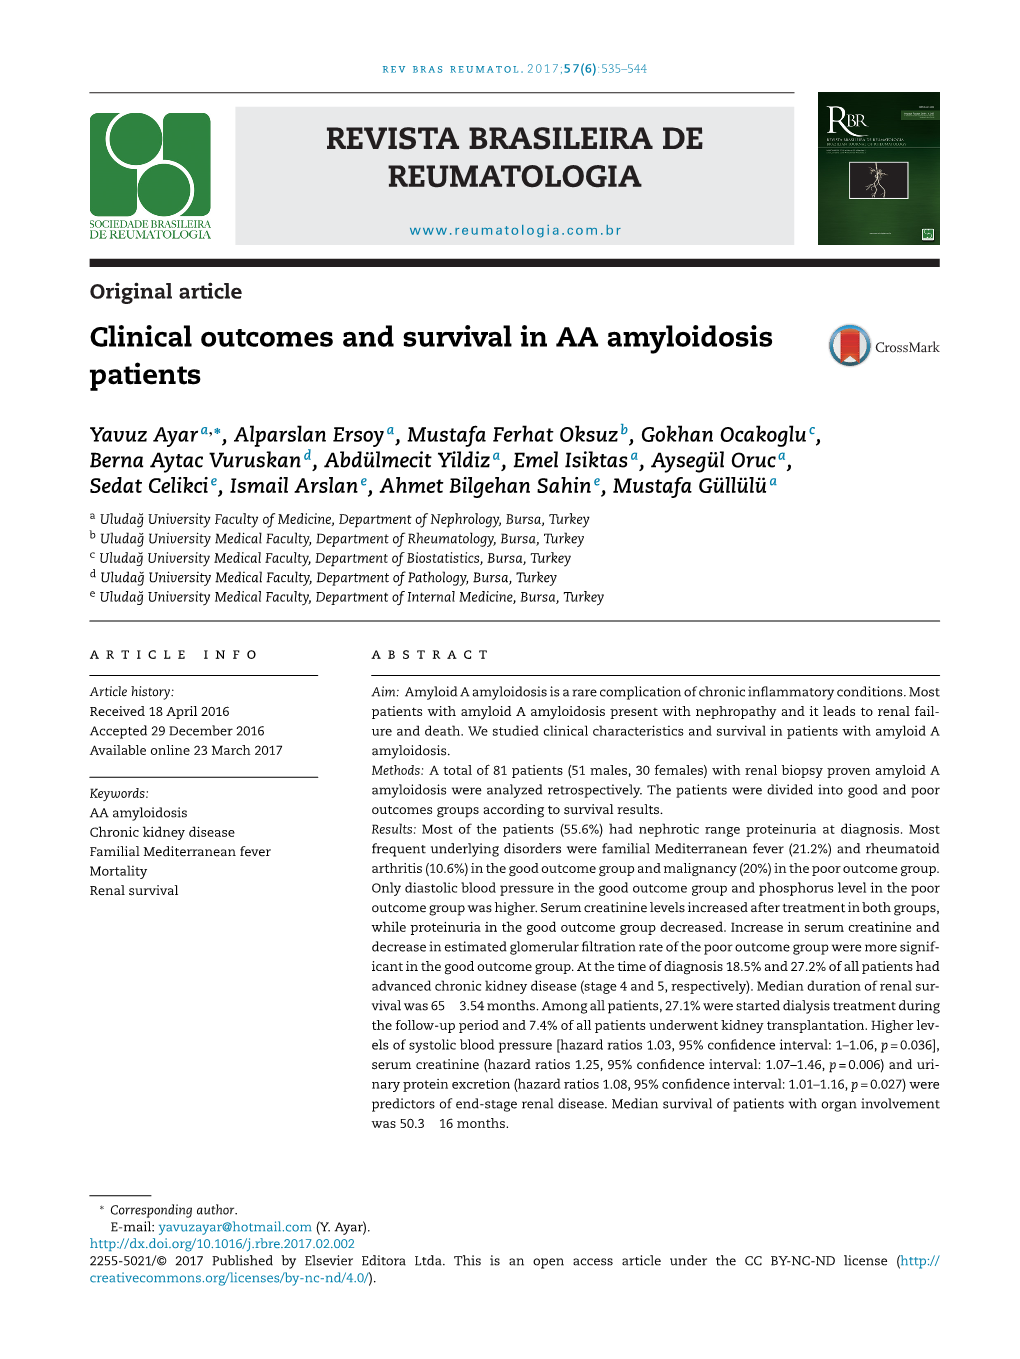 Clinical Outcomes and Survival in AA Amyloidosis Patients